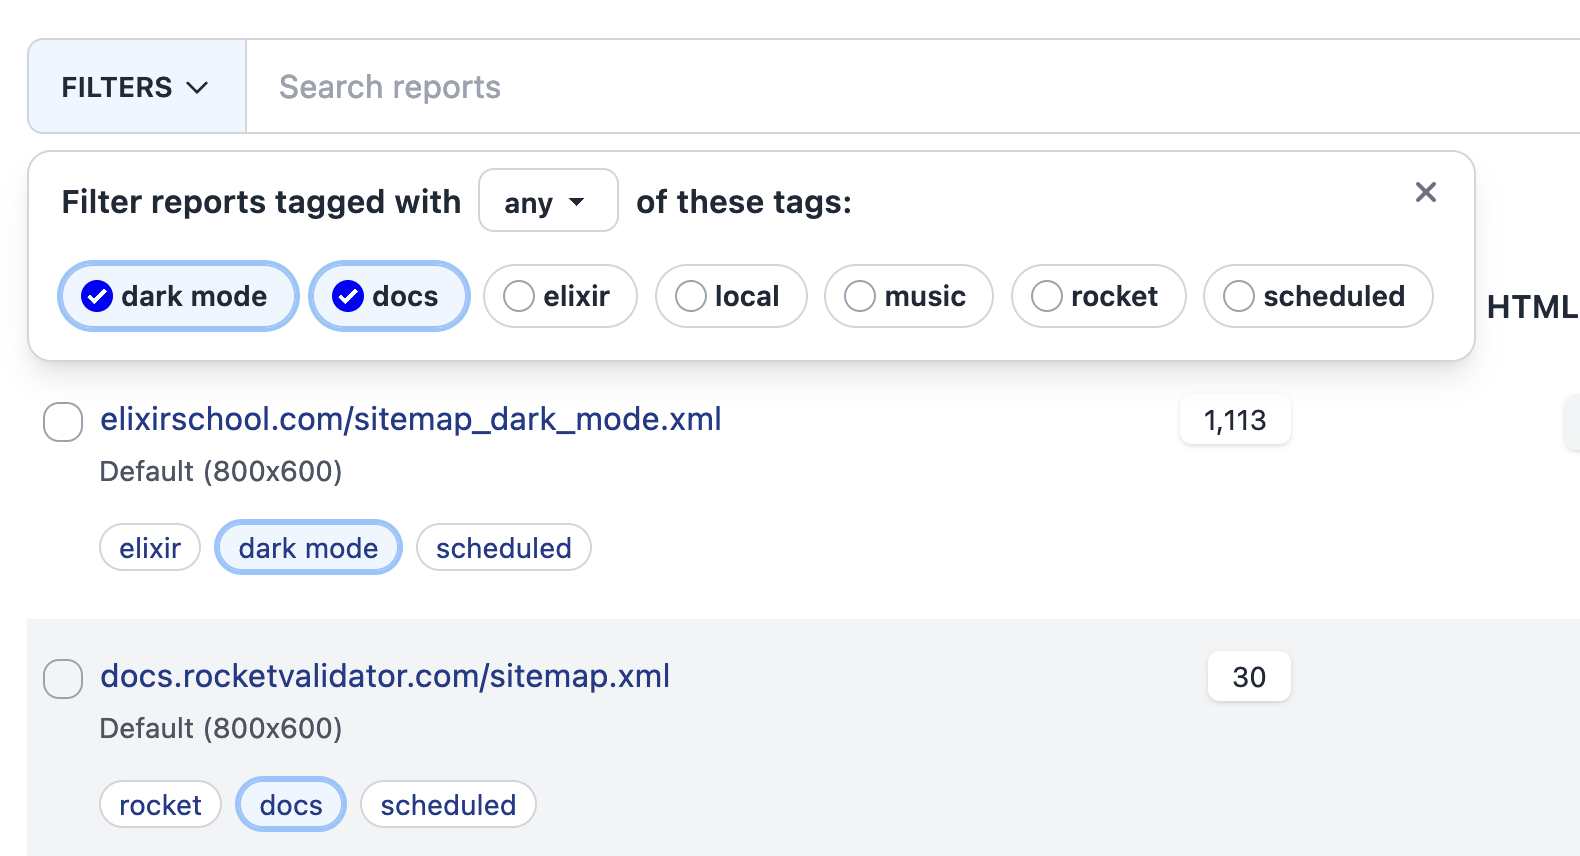 Filtering reports by tag